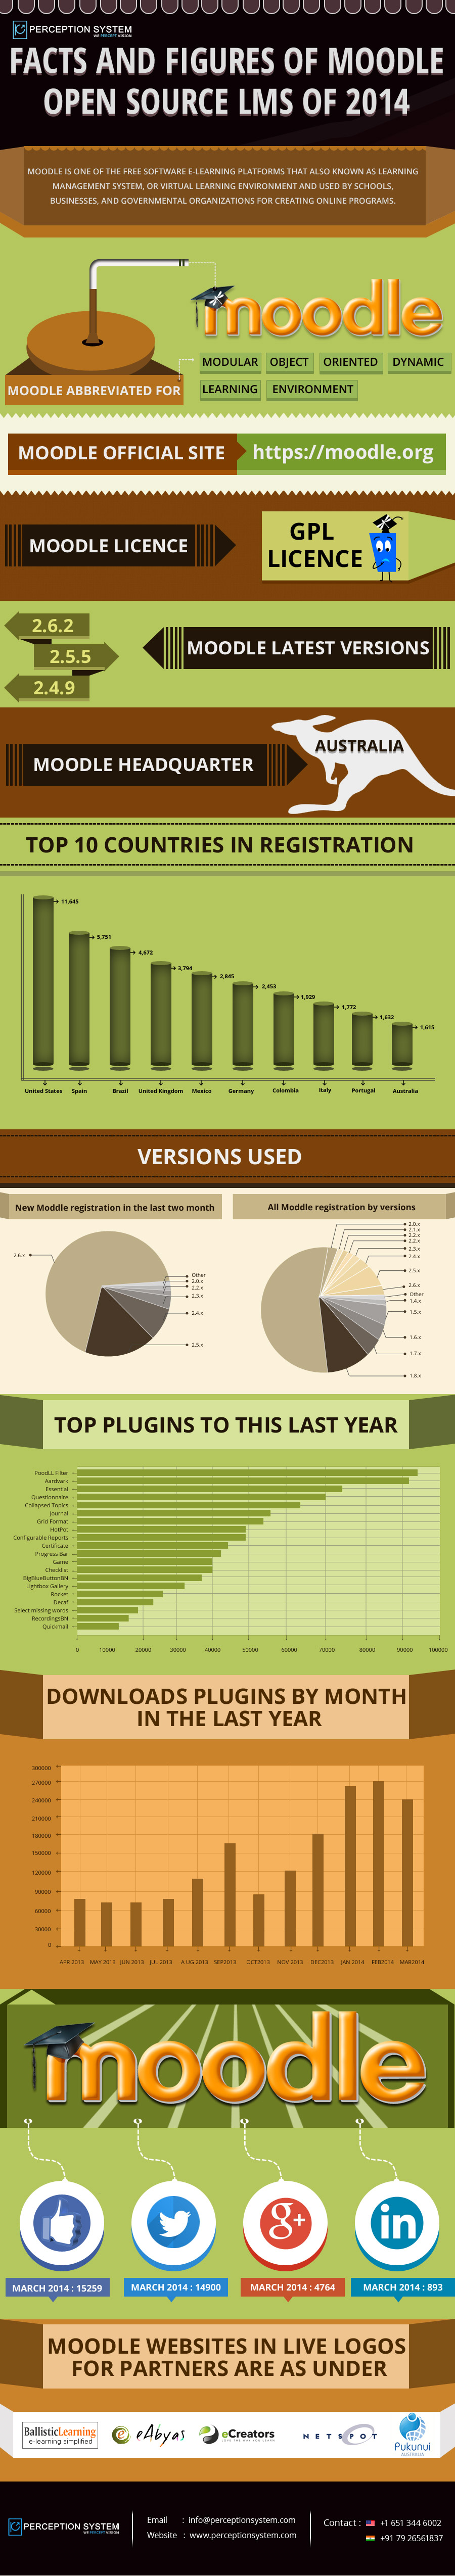 Facts and Figures of Moodle Open Source LMS of 2014-Infographic